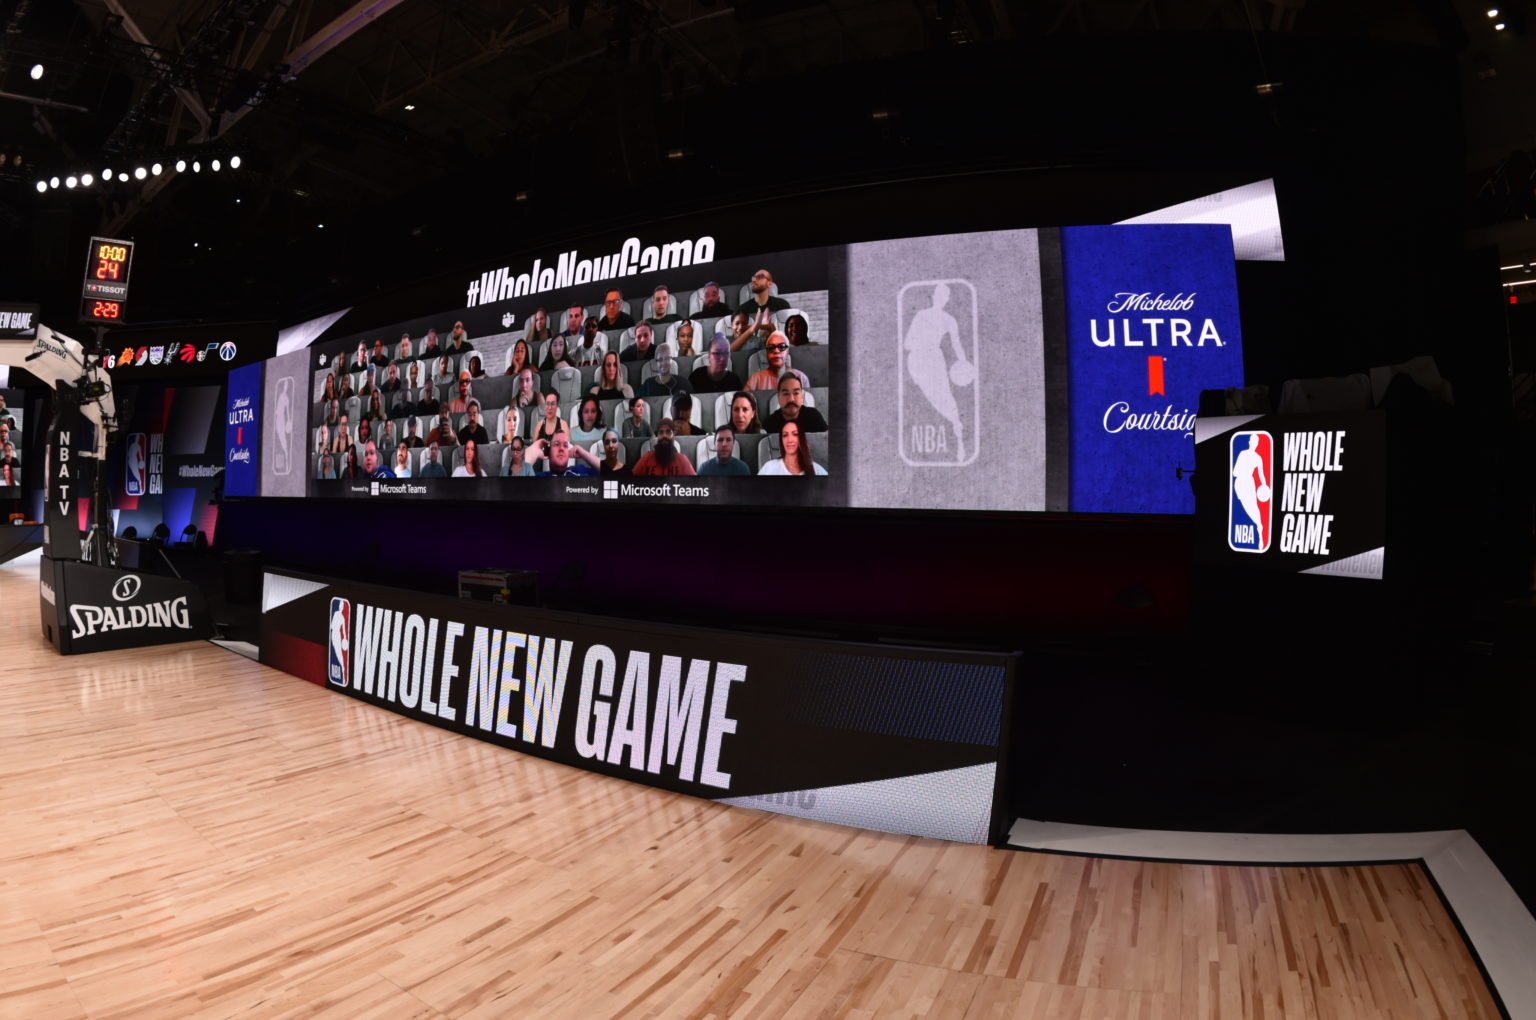 20200728.Microsoft-is-bringing-a-virtual-audience-to-NBA-games-with-Microsoft-Teams-Together-Mode-01.jpg